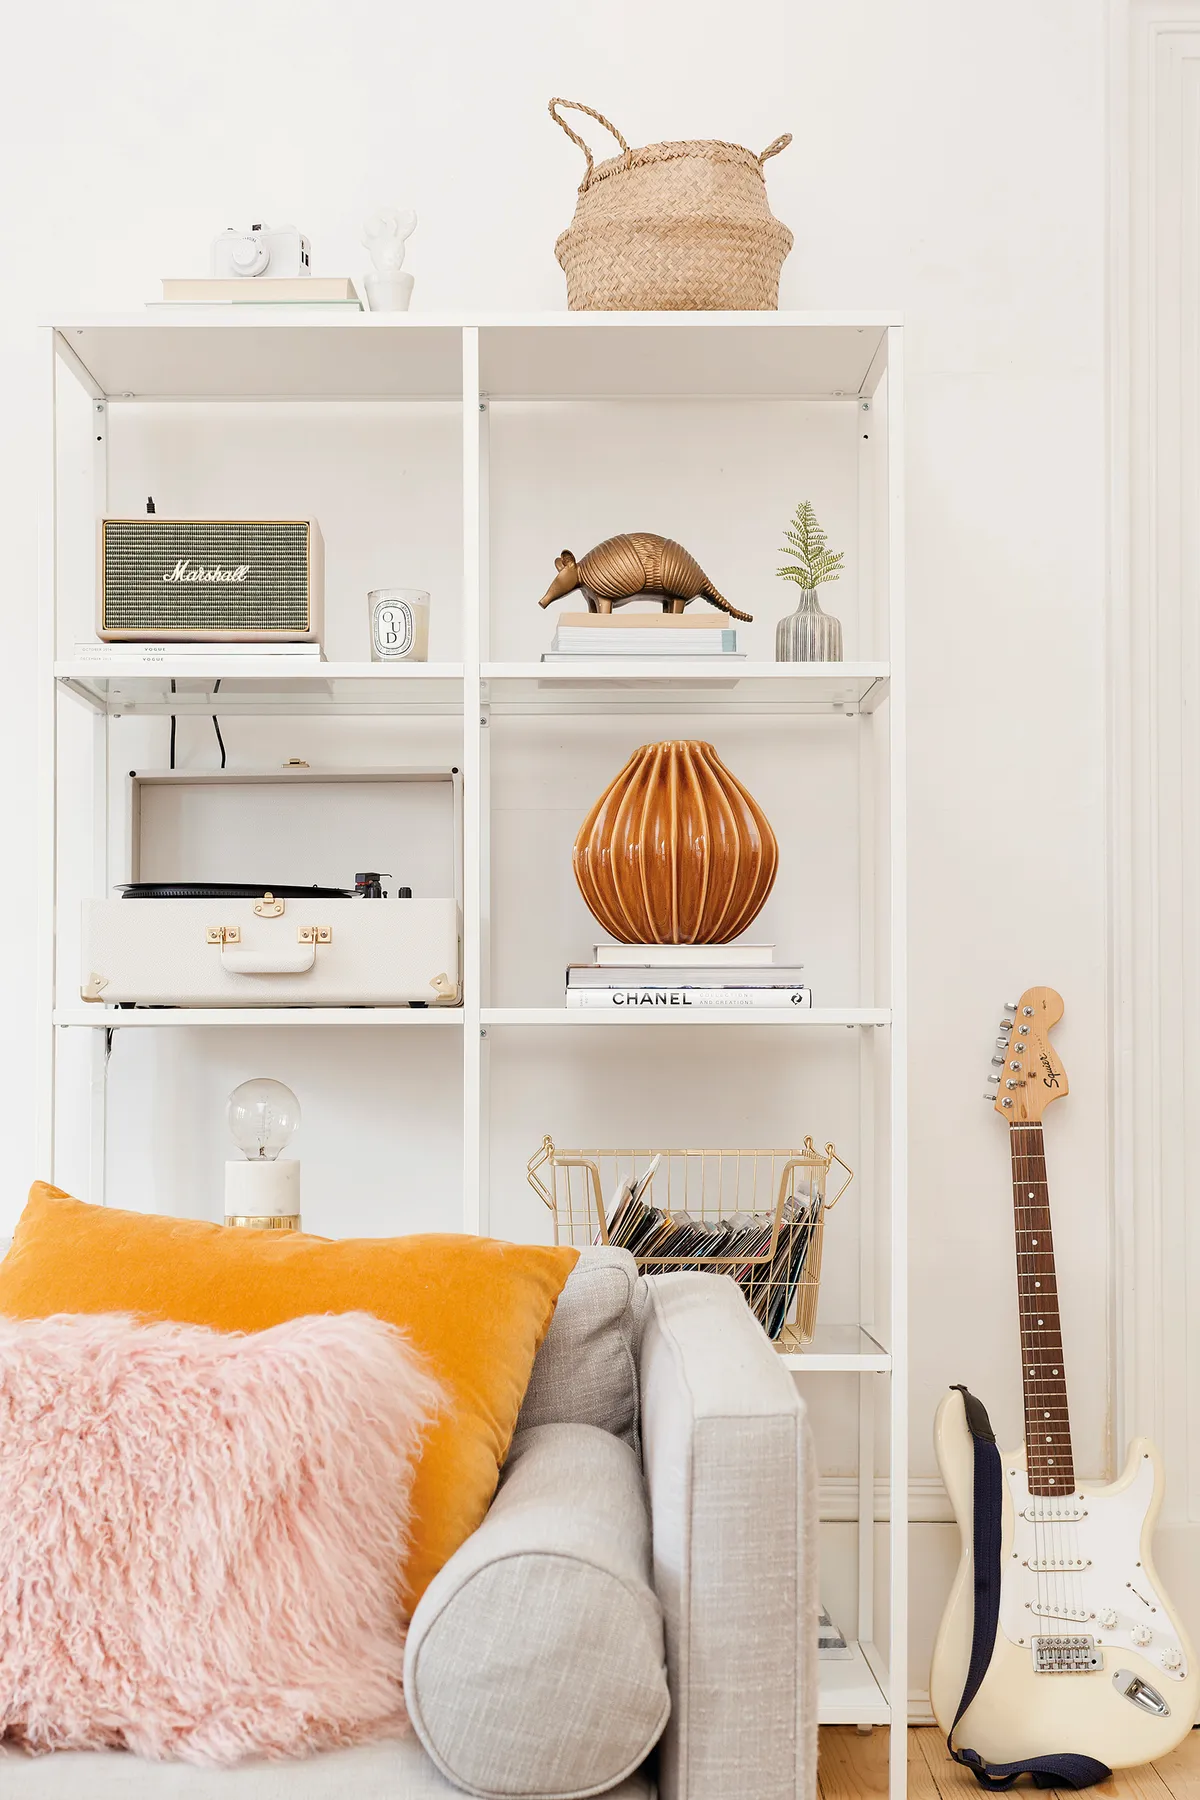 Kate has displayed a variety of accessories, including a vintage record player from Urban Outfitters, on this open shelving unit